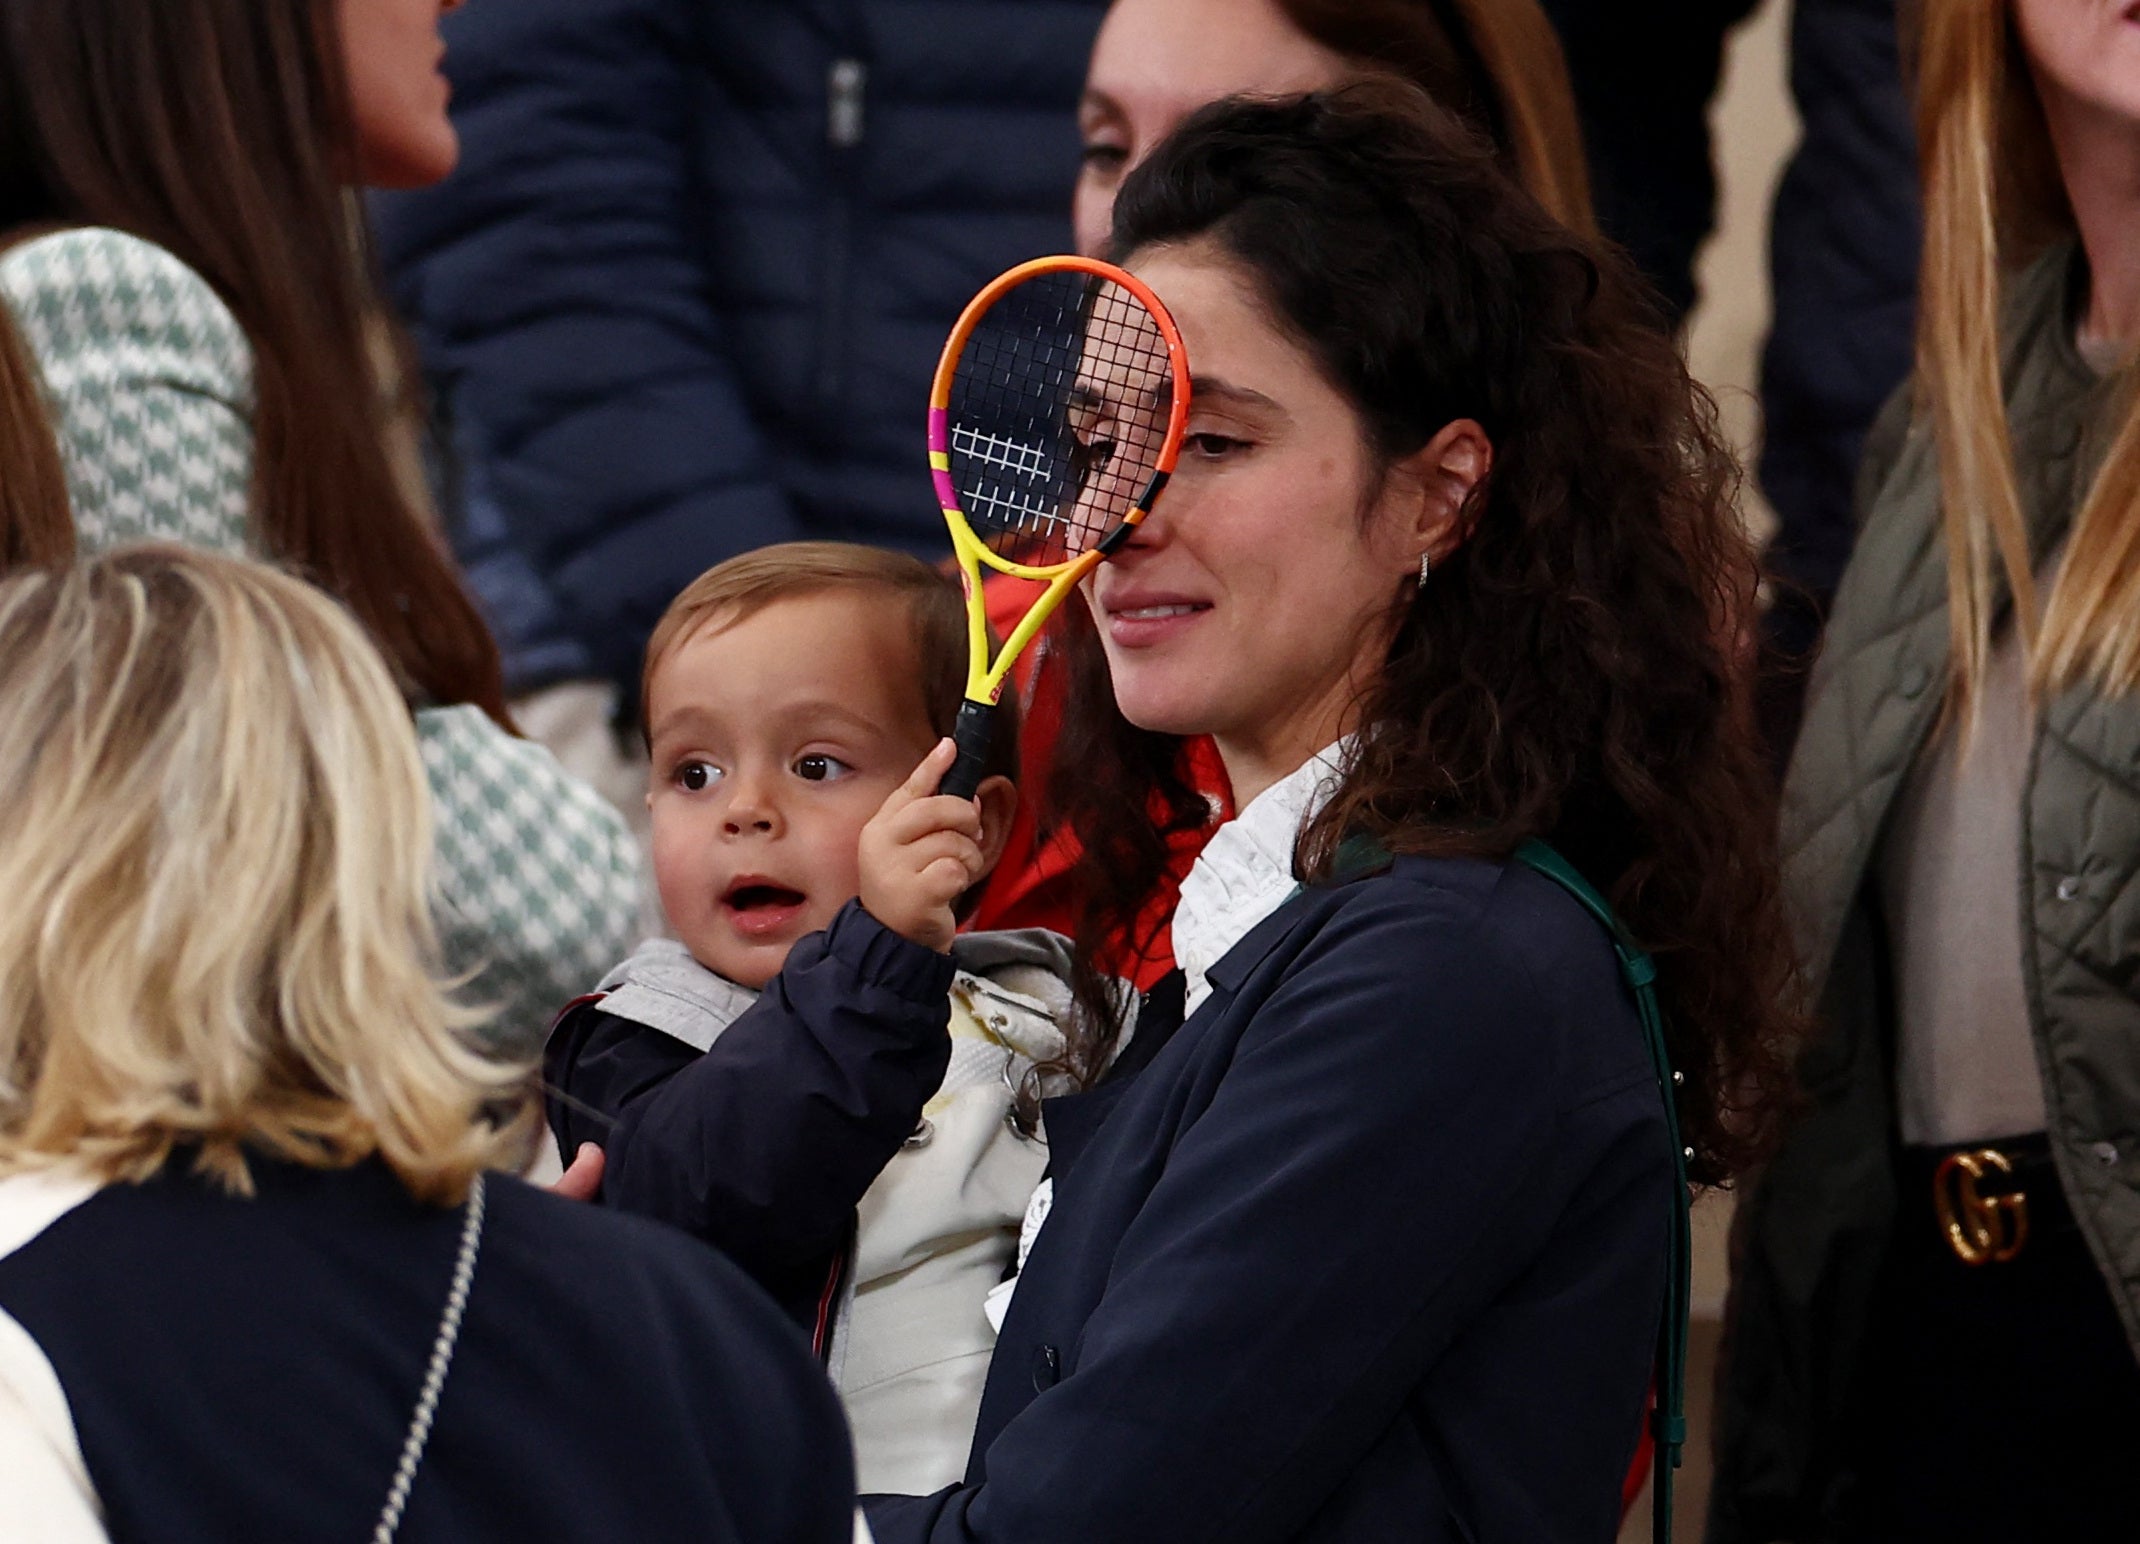 Nadal's wife, Xisca and their infant son, Rafael Jr, are in Paris